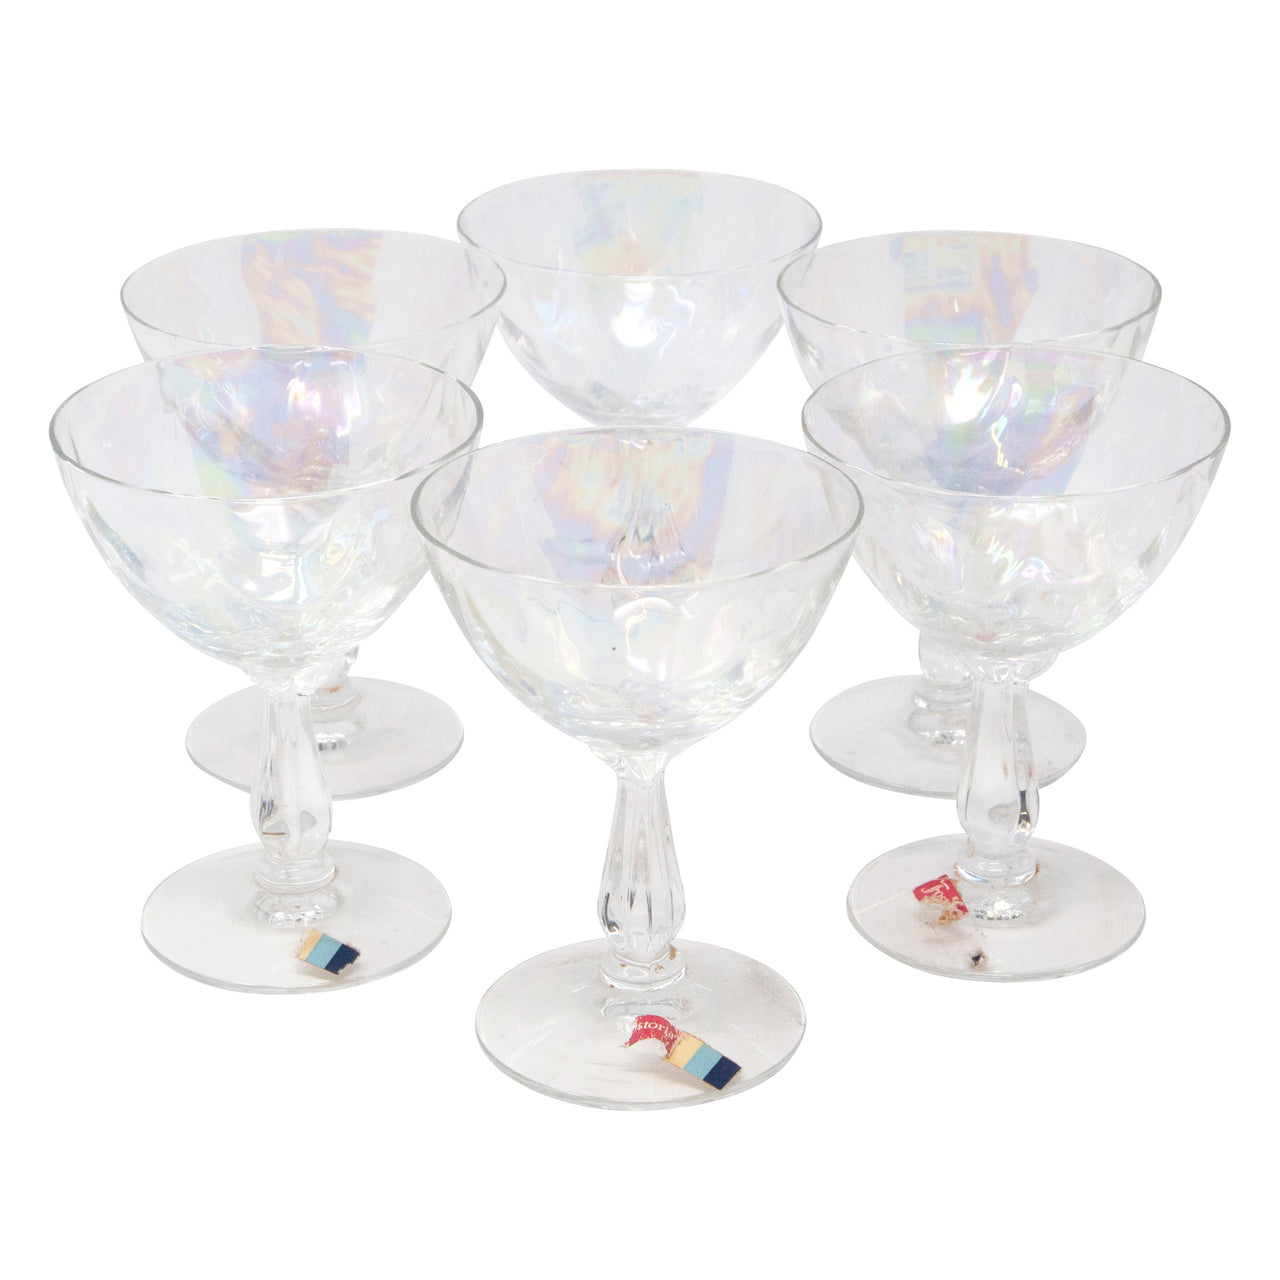 Vintage Fostoria Draping Iridescent Cocktail Glasses | The Hour Shop